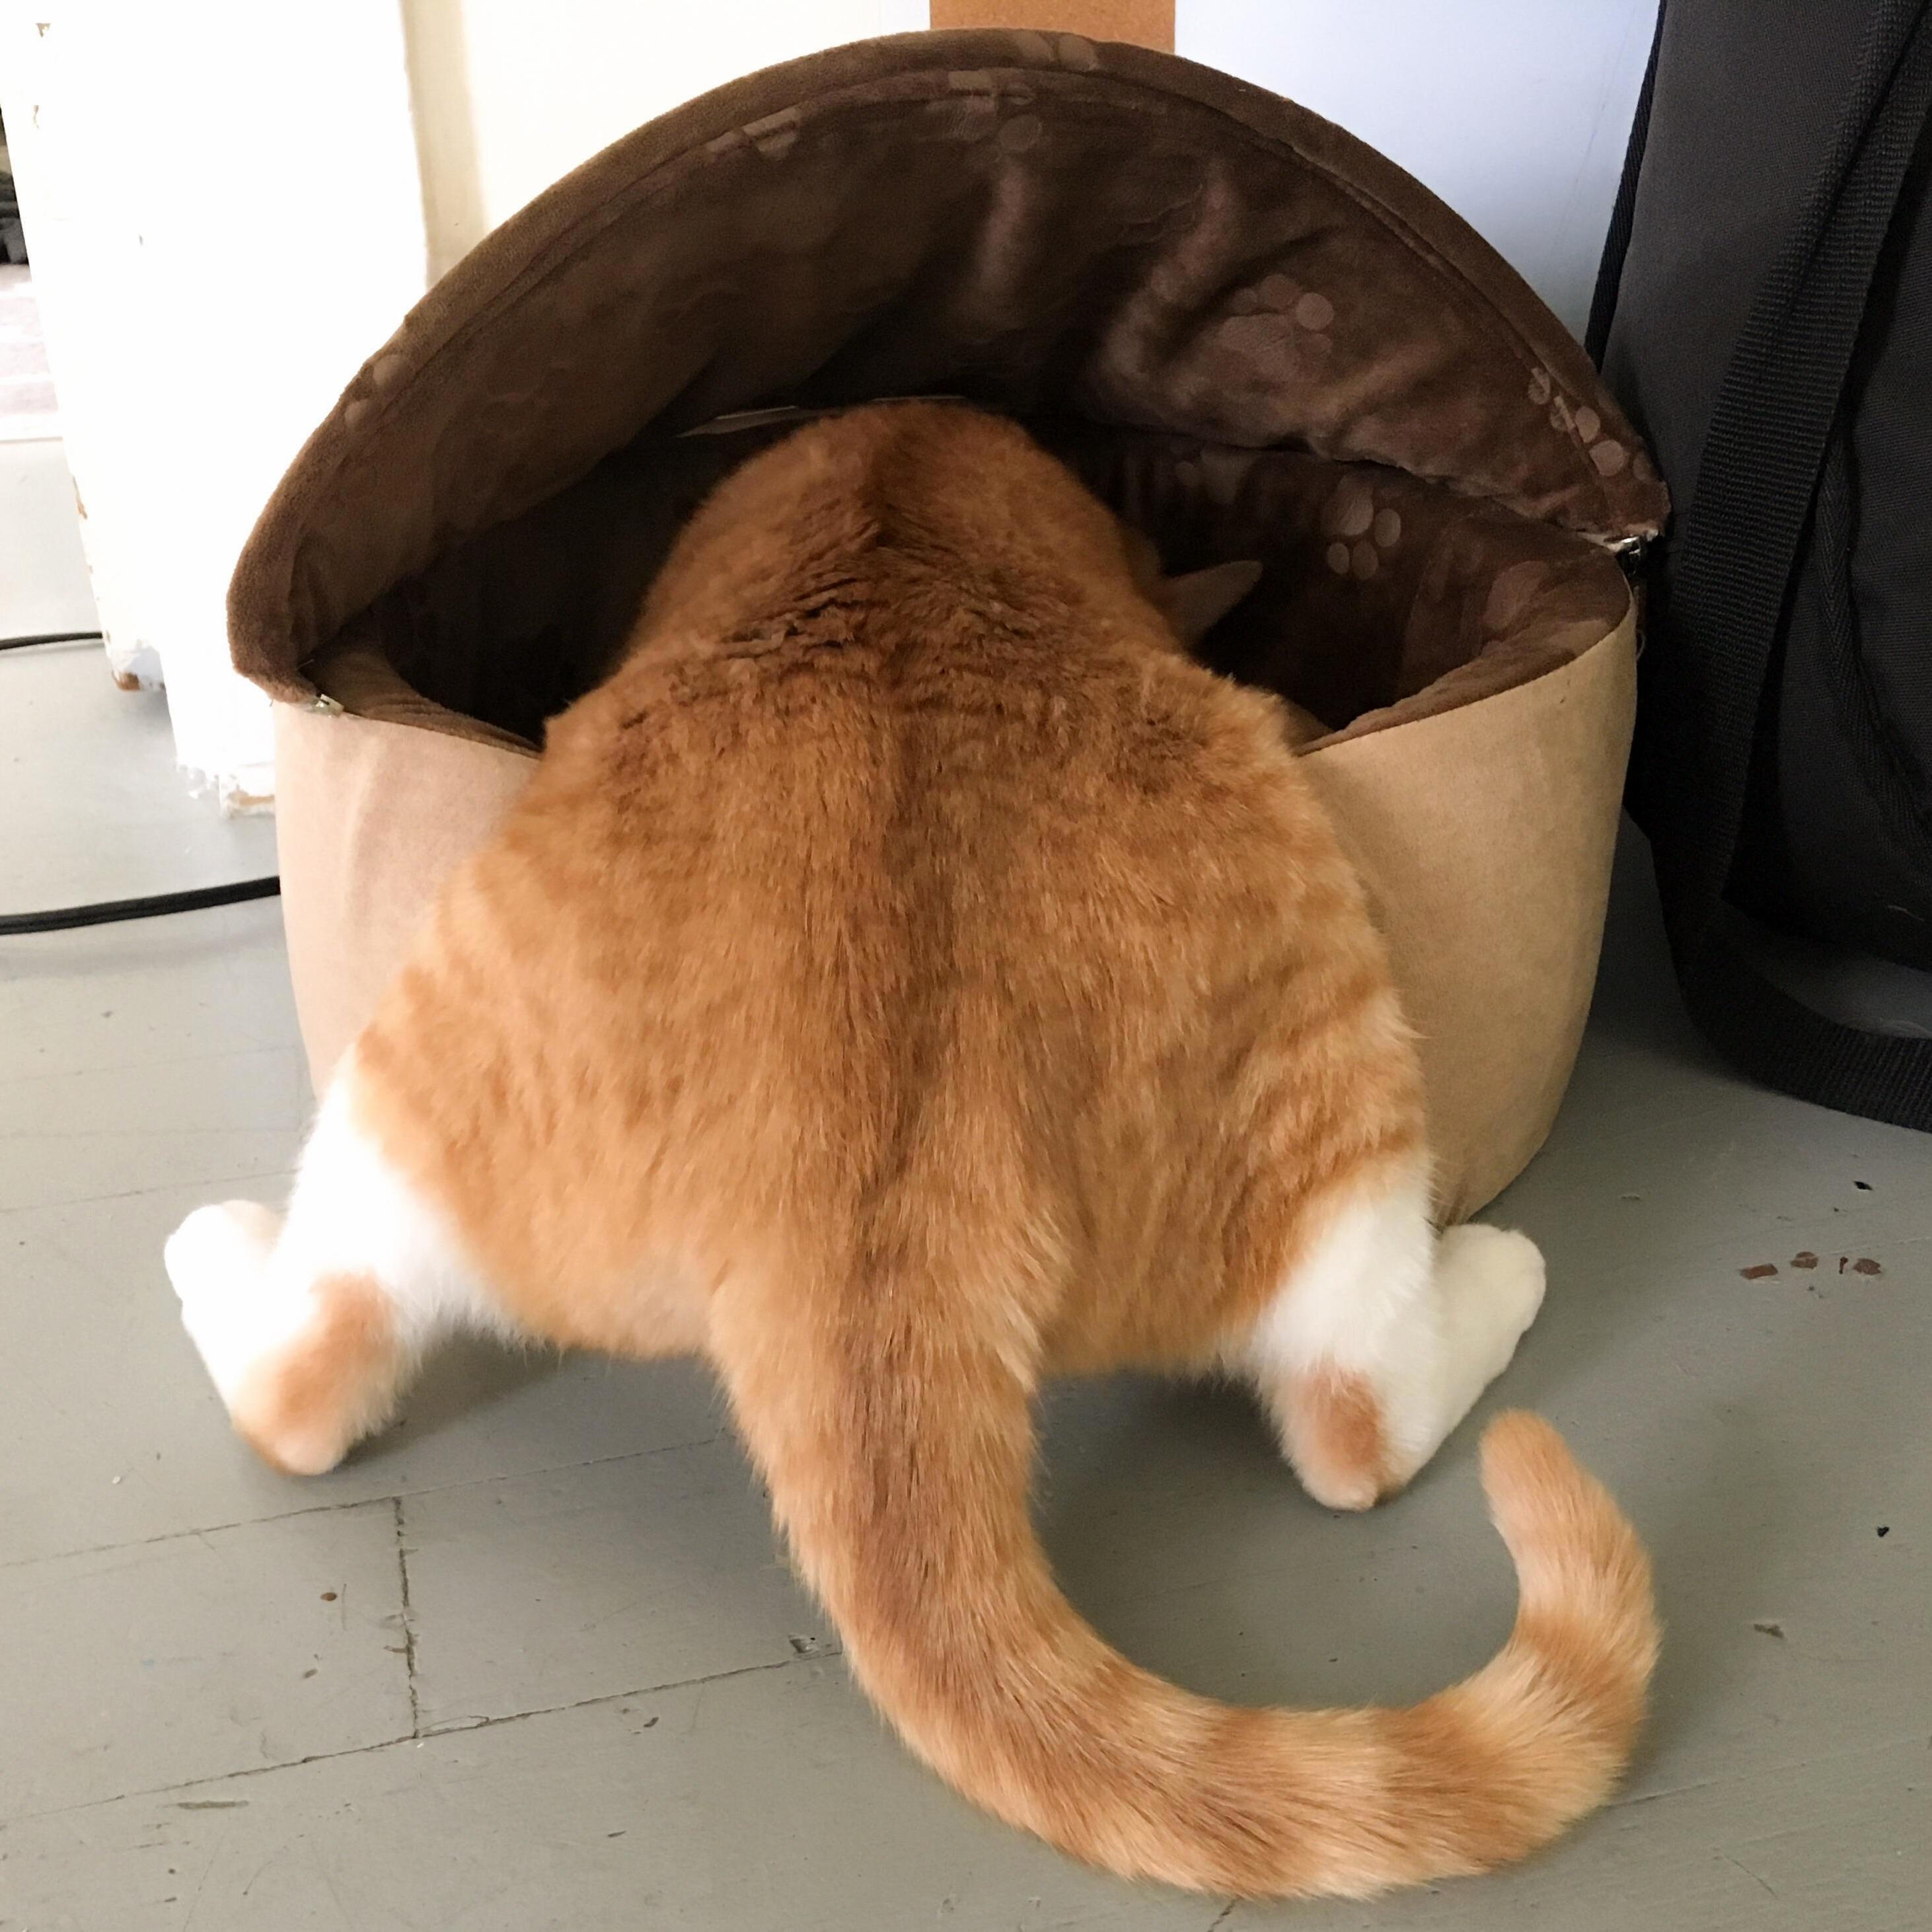 Stella doesnt understand how cat beds work, but her squats are on point